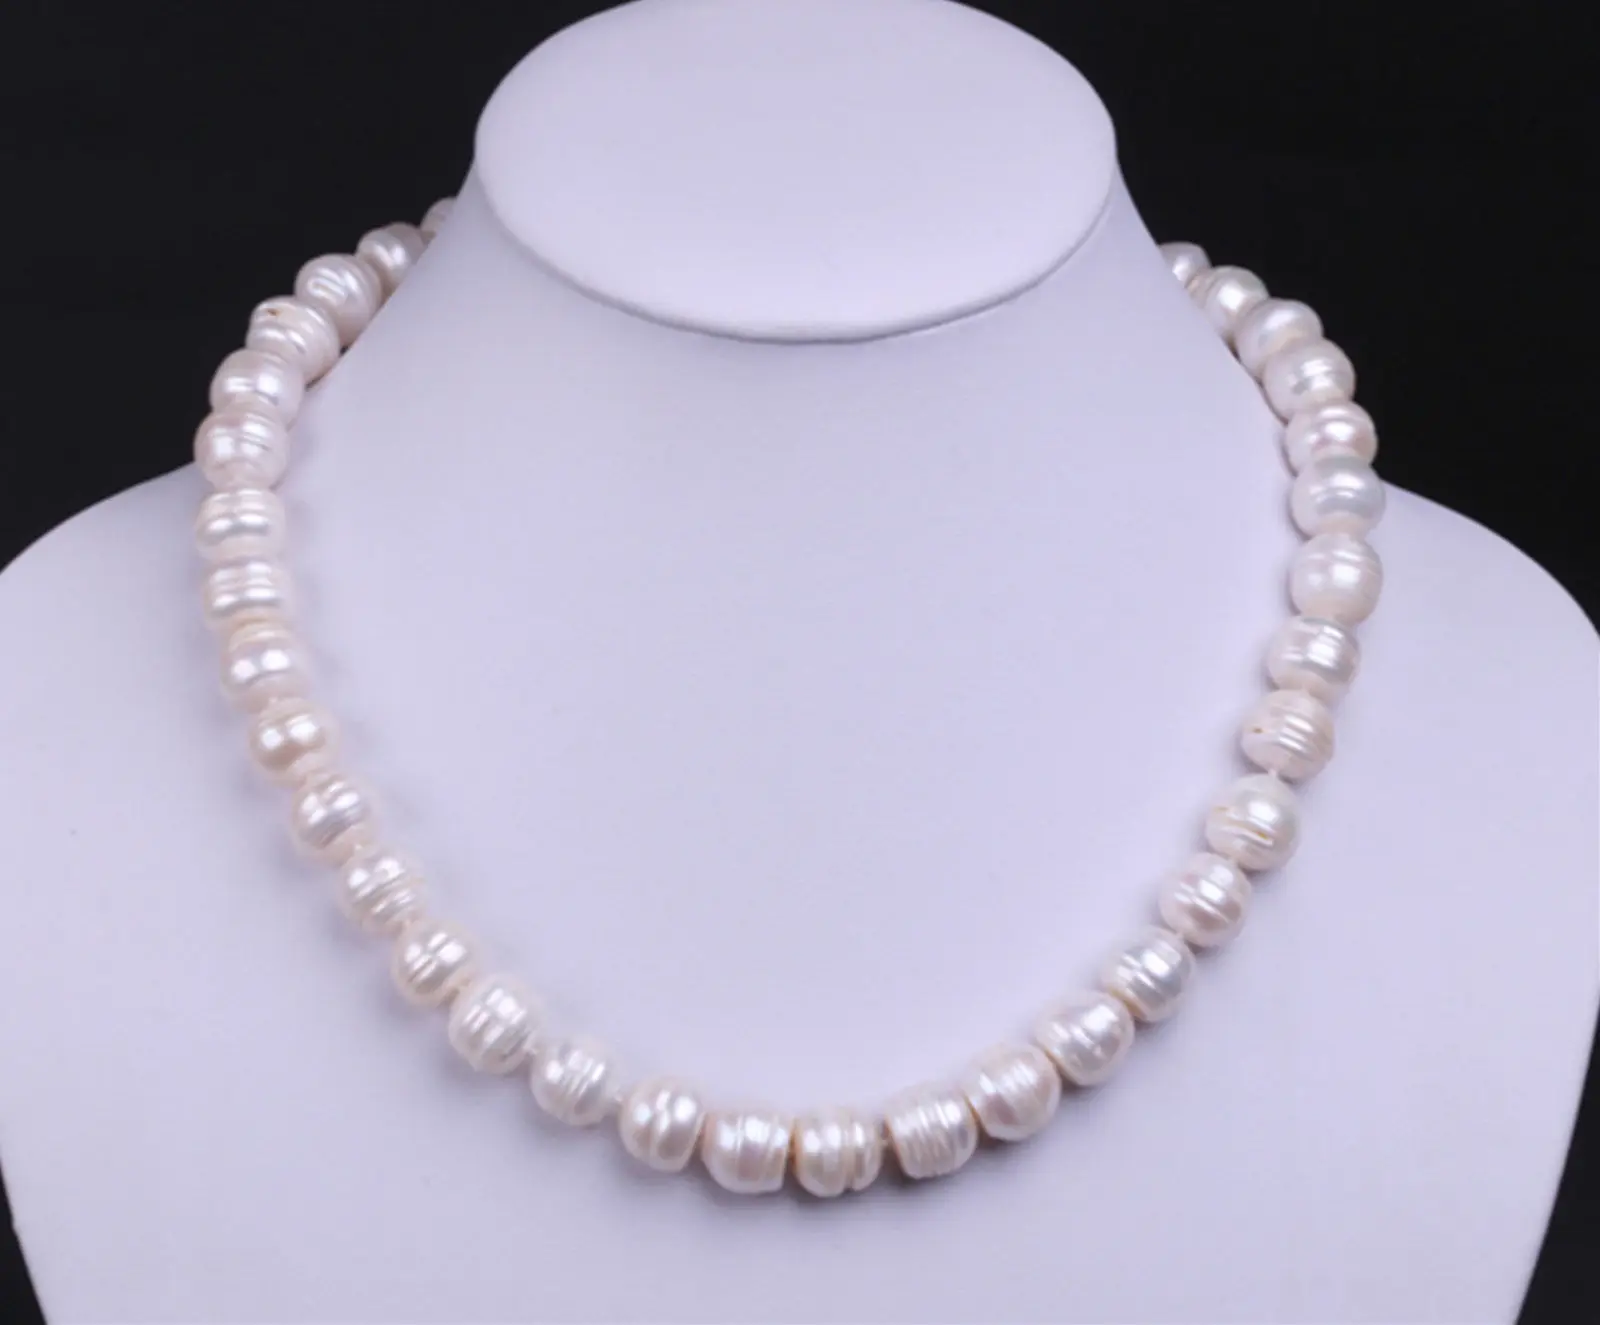 

HABITOO Rare Large 11-12mm Natural White Baroque Cultured Freshwater Pearl Necklace Choker Jewelry Chains Necklace for Woman